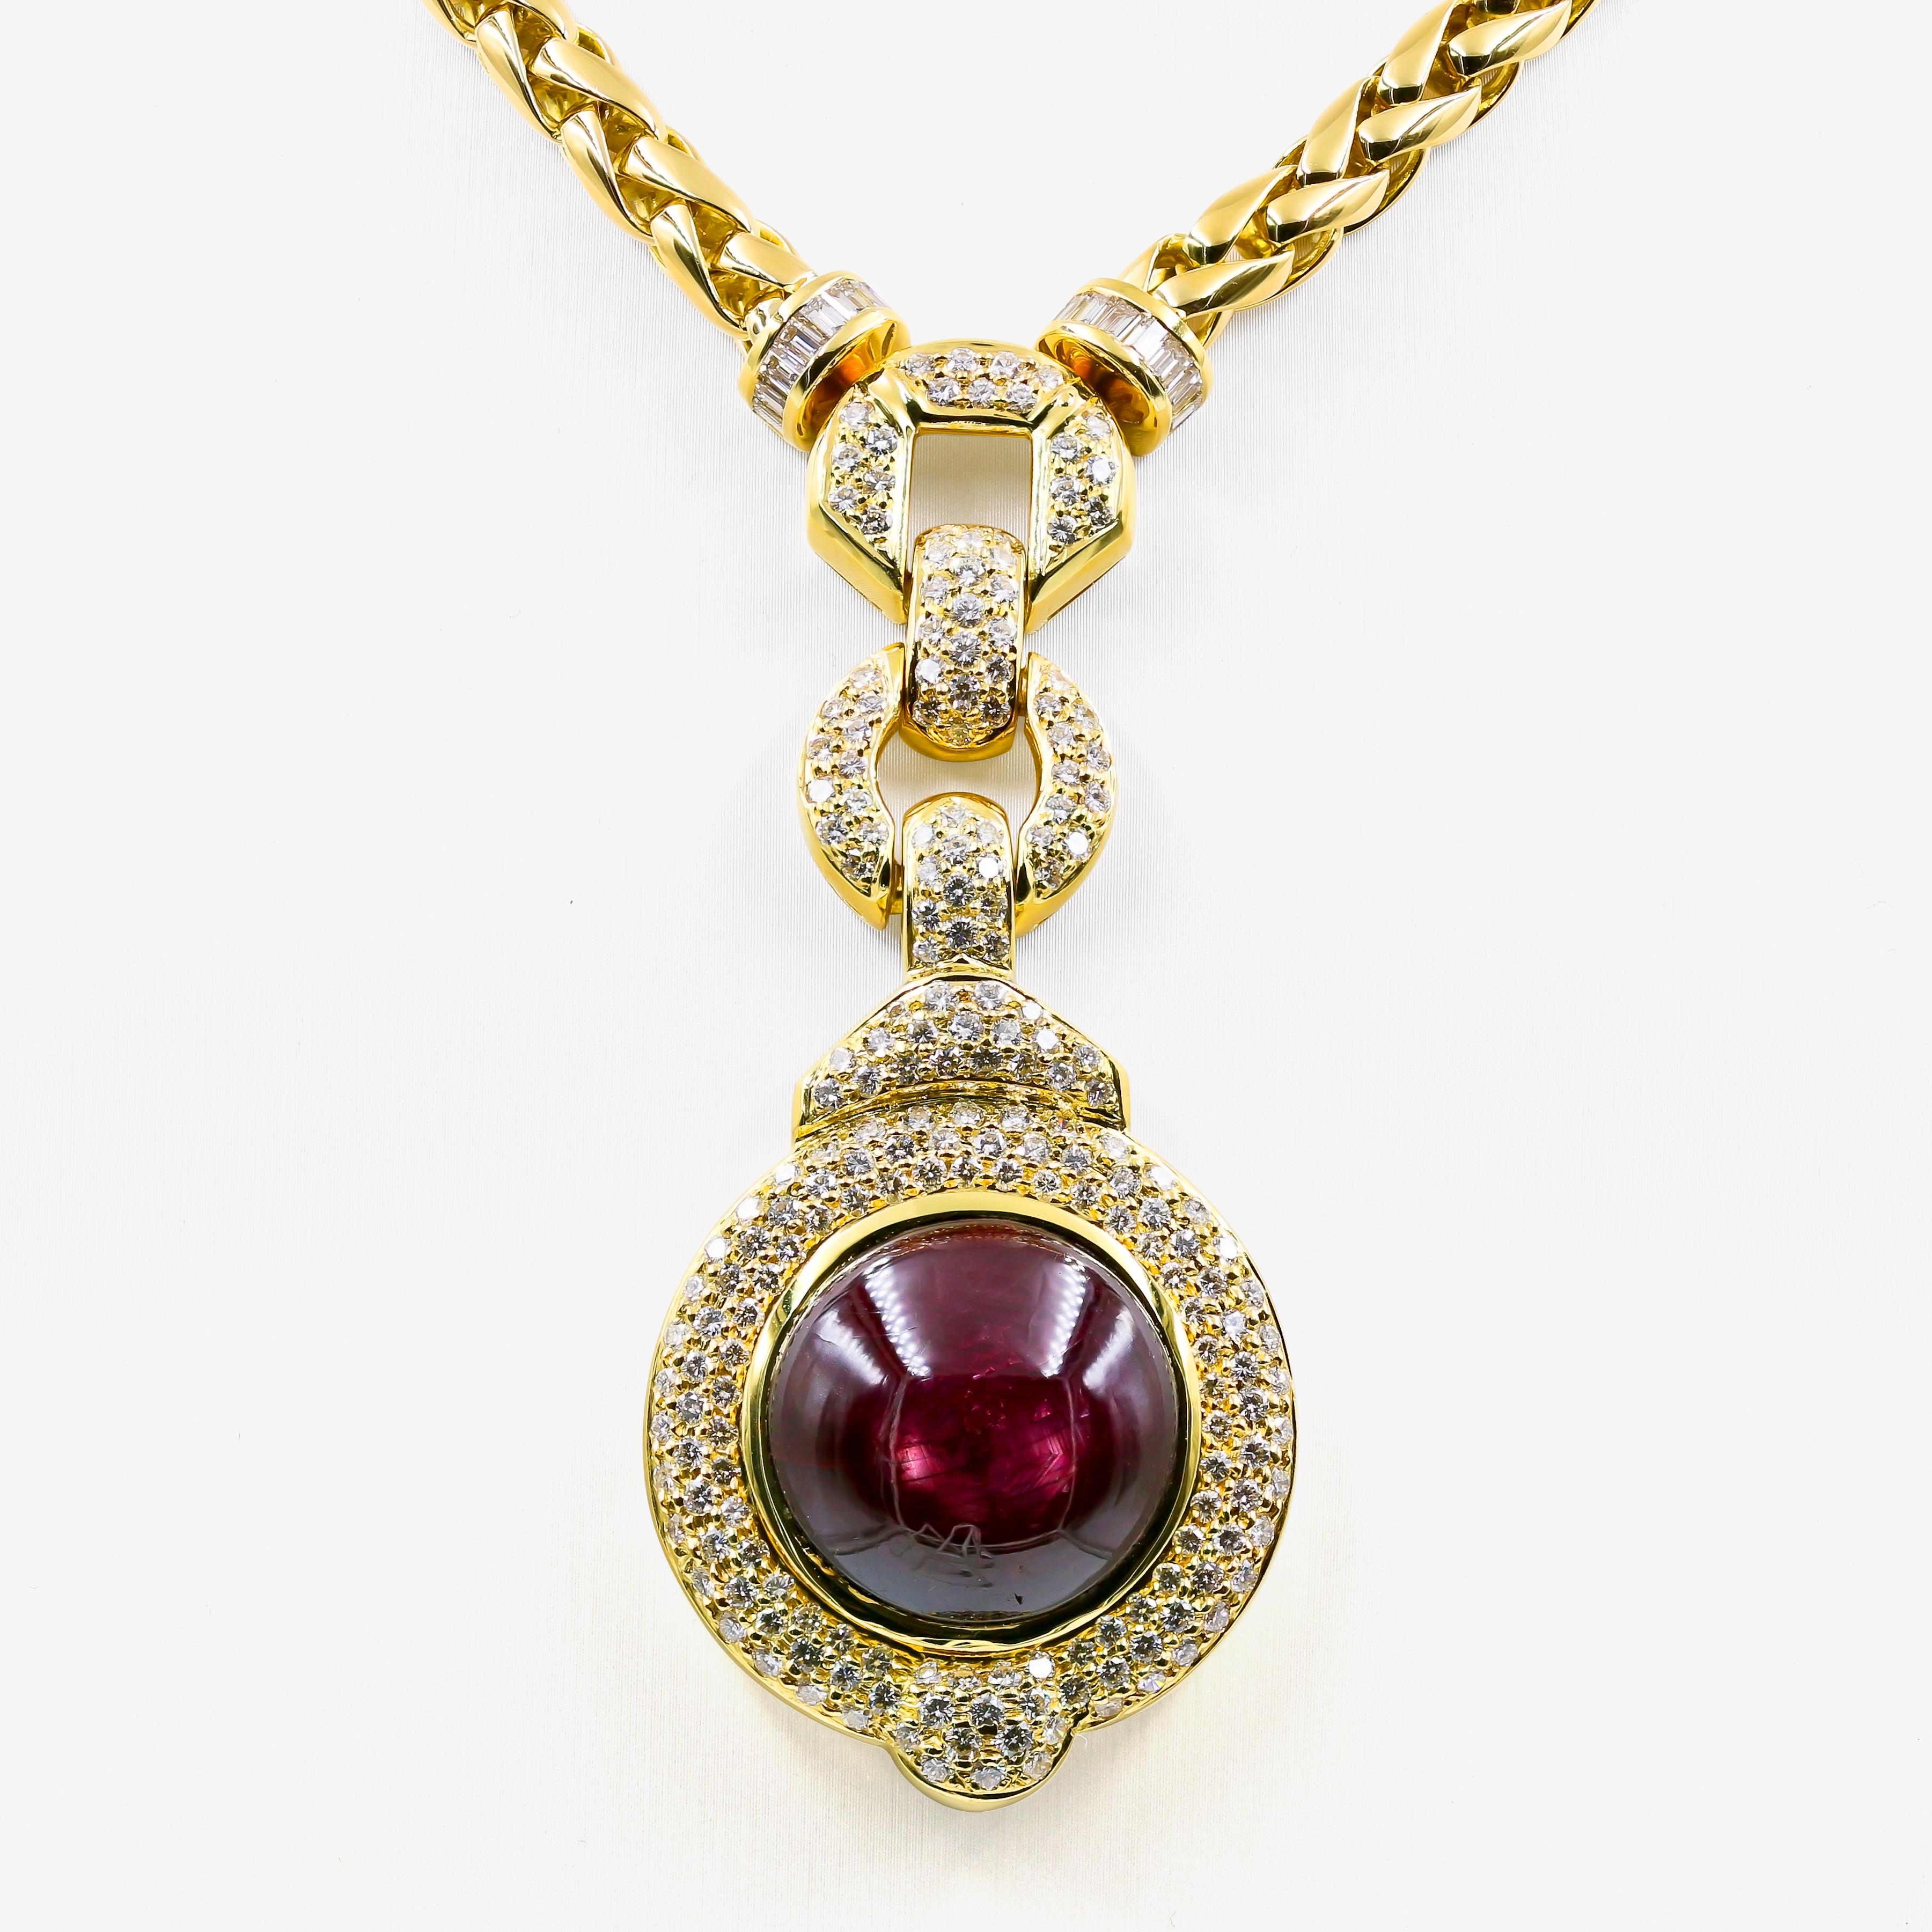 BUYERS MOST DEMANDED 256.00 CTS NATURAL FACETED OVAL SHAPED RED RUBY NECKLACE